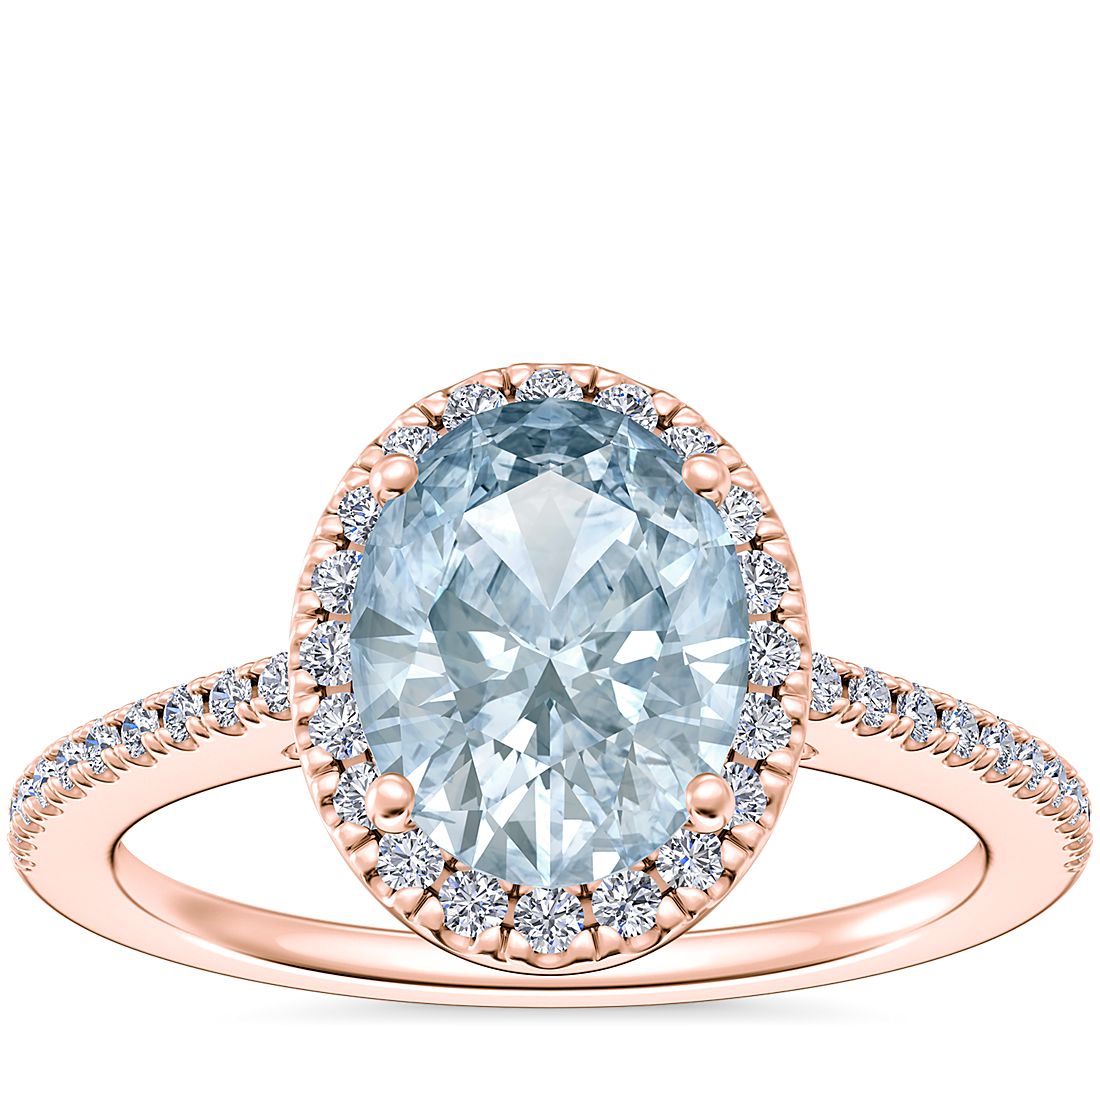 Classic Halo Diamond Engagement Ring with Oval Aquamarine in 14k Rose Gold (9x7mm)